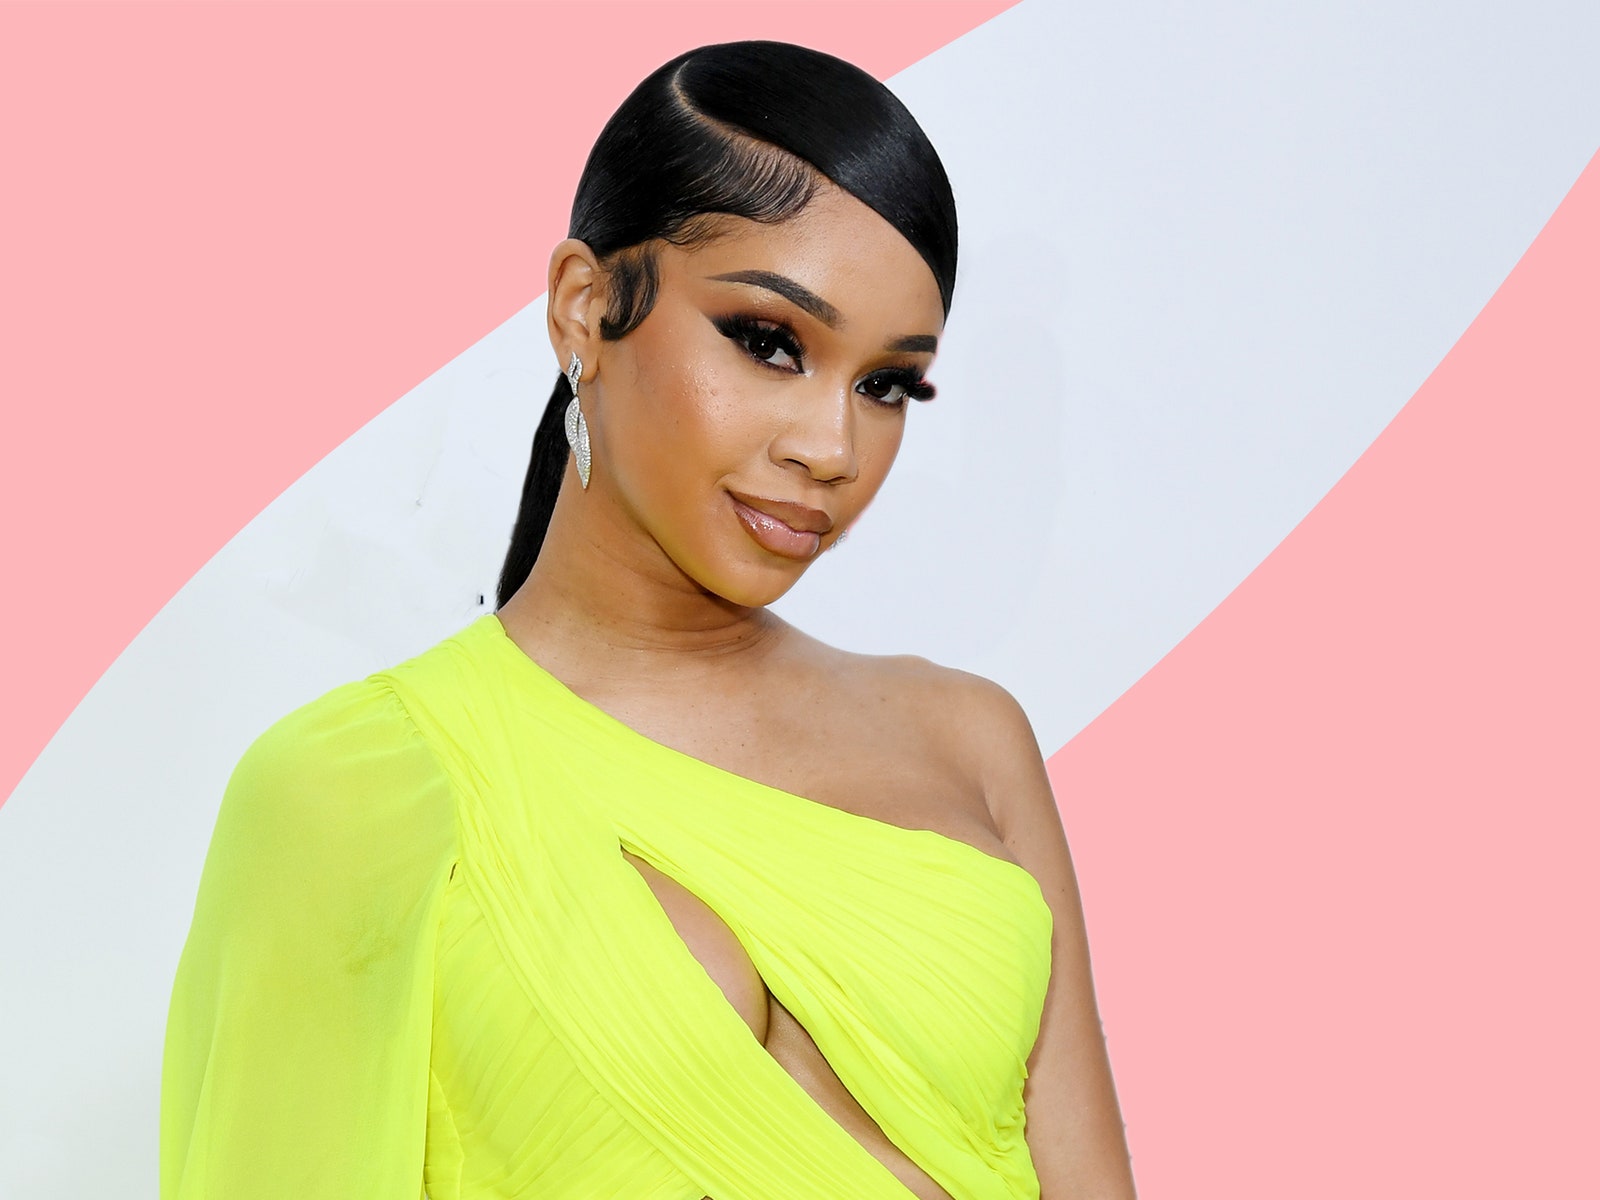 Saweetie styled her bangs like baby hairs and is rightfully obsessed with them